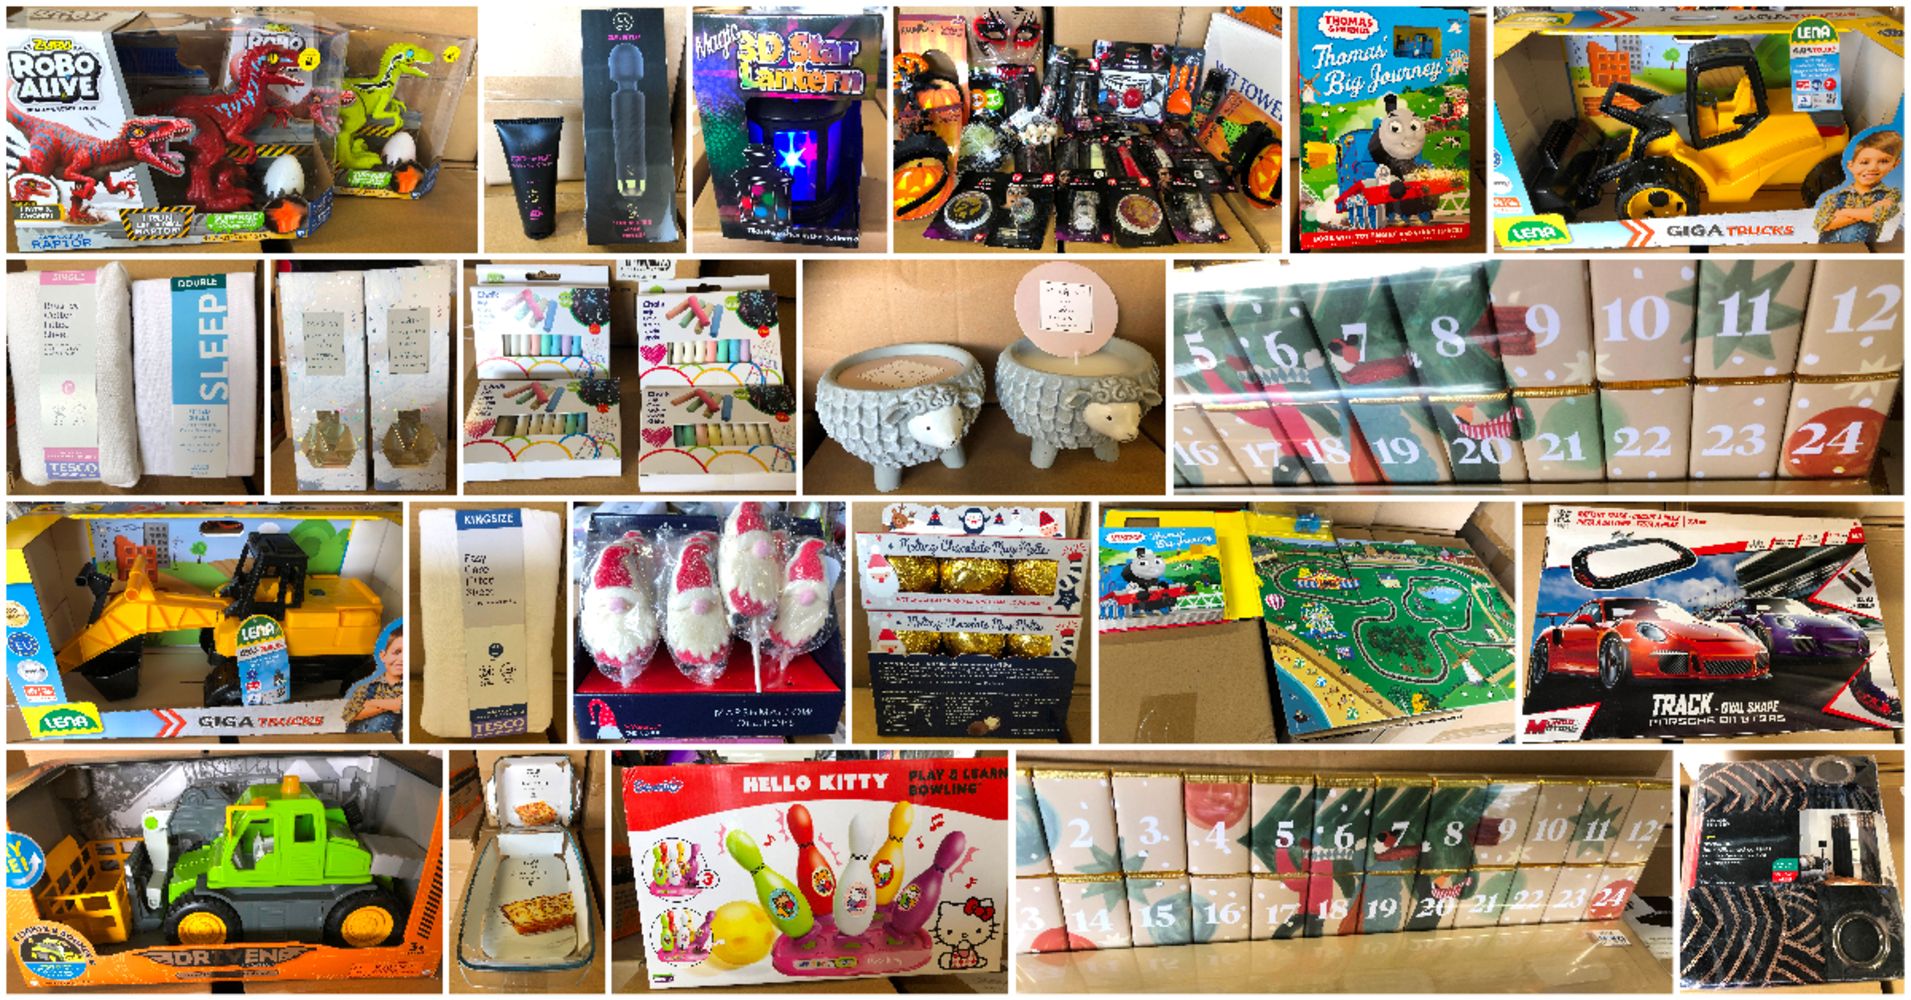 Household, Bedding and Curtains, Toys, Halloween and Personal (Driffield)